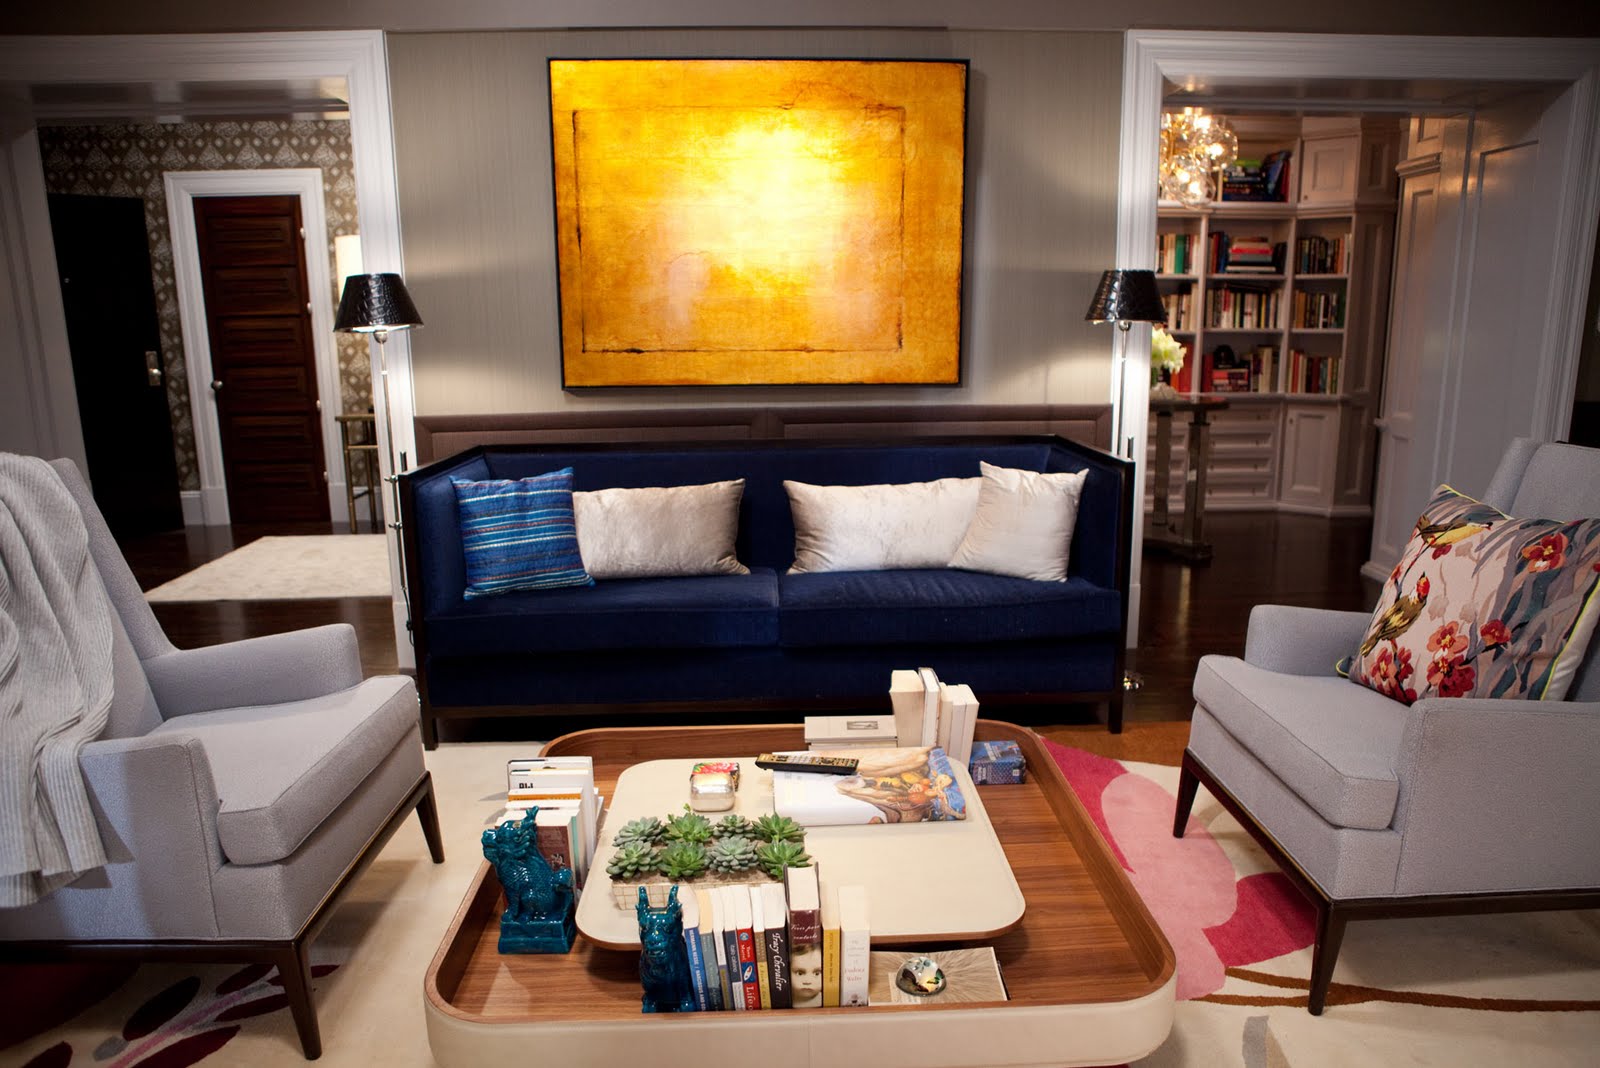 Can You Match These Living Rooms to Their TV Shows? 04 1